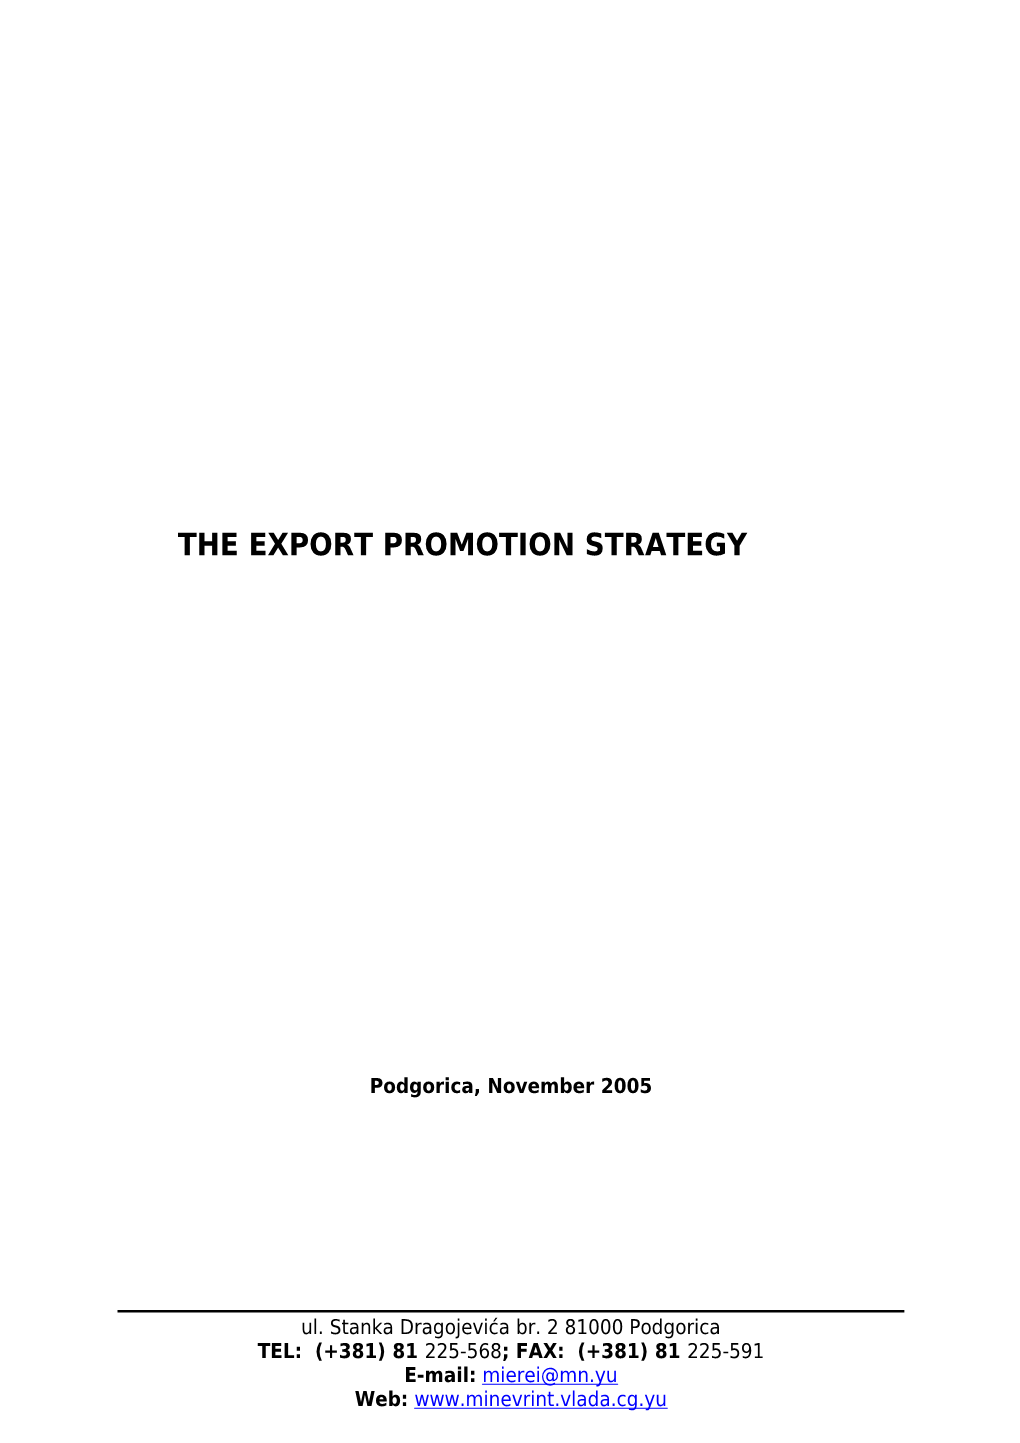 The Export Promotion Strategy